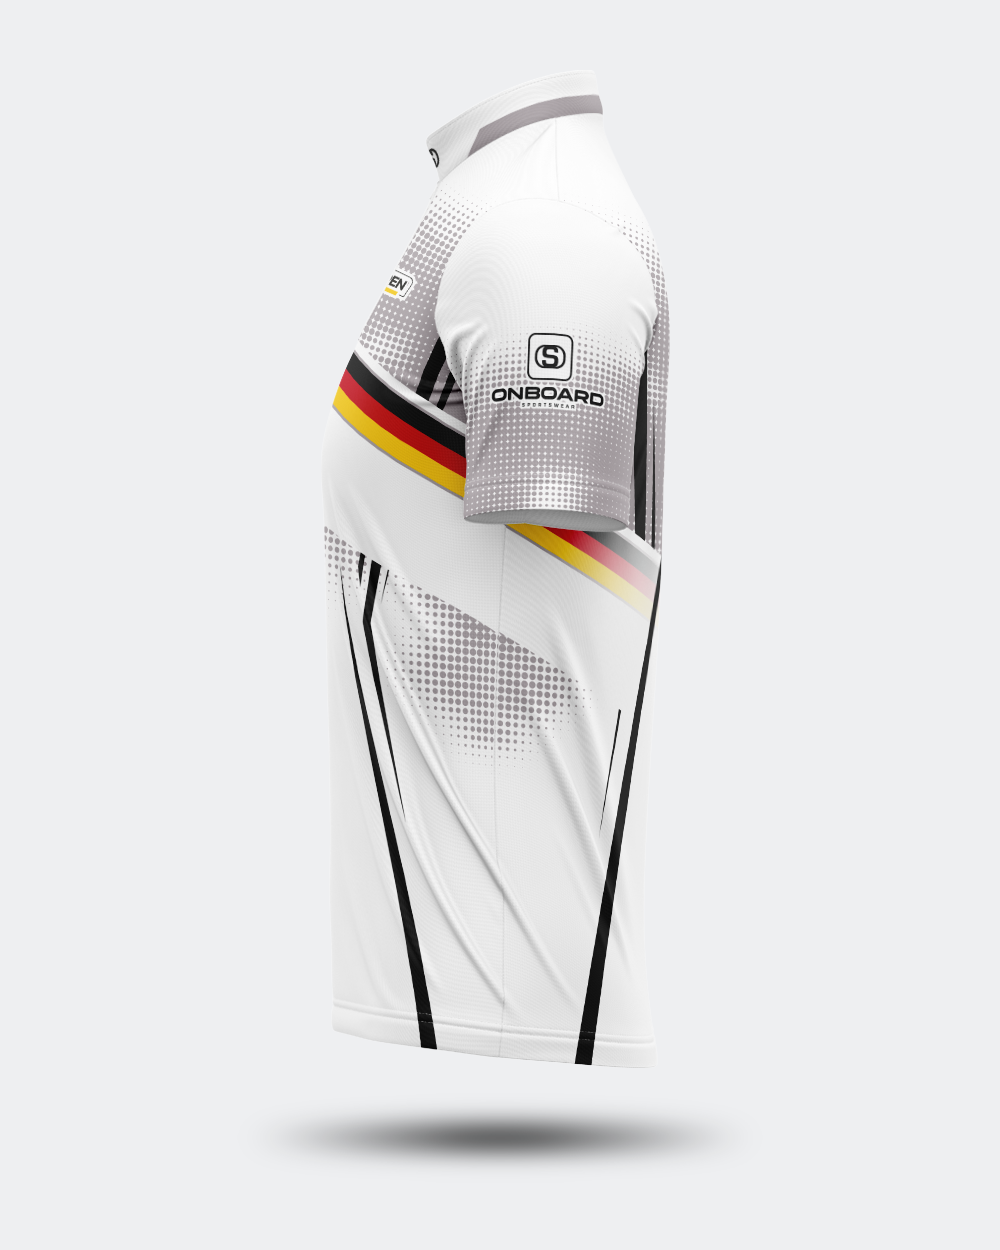 Official 2023 White European Open Event Jersey